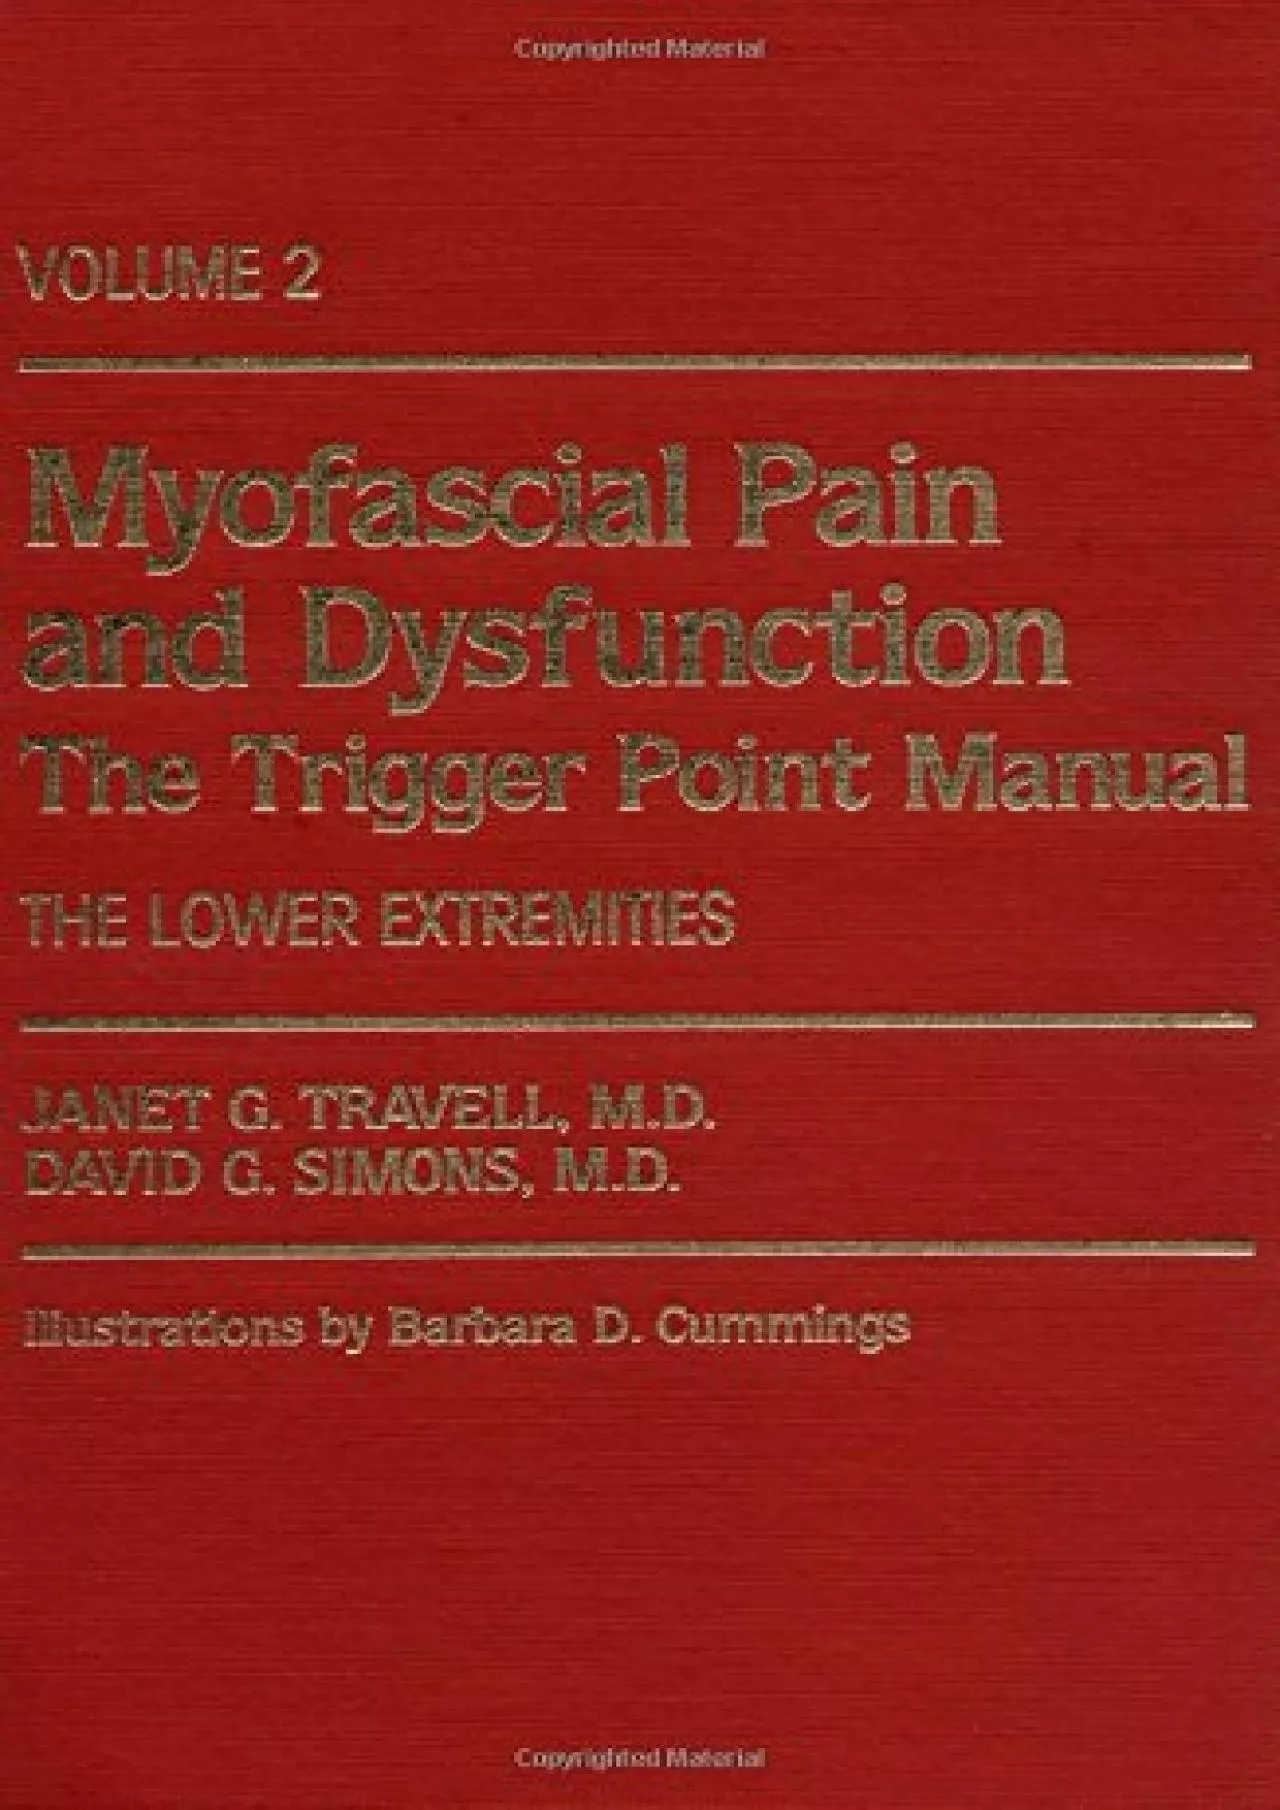 (BOOK)-Myofascial Pain and Dysfunction: The Trigger Point Manual Vol. 2., The Lower Extremities